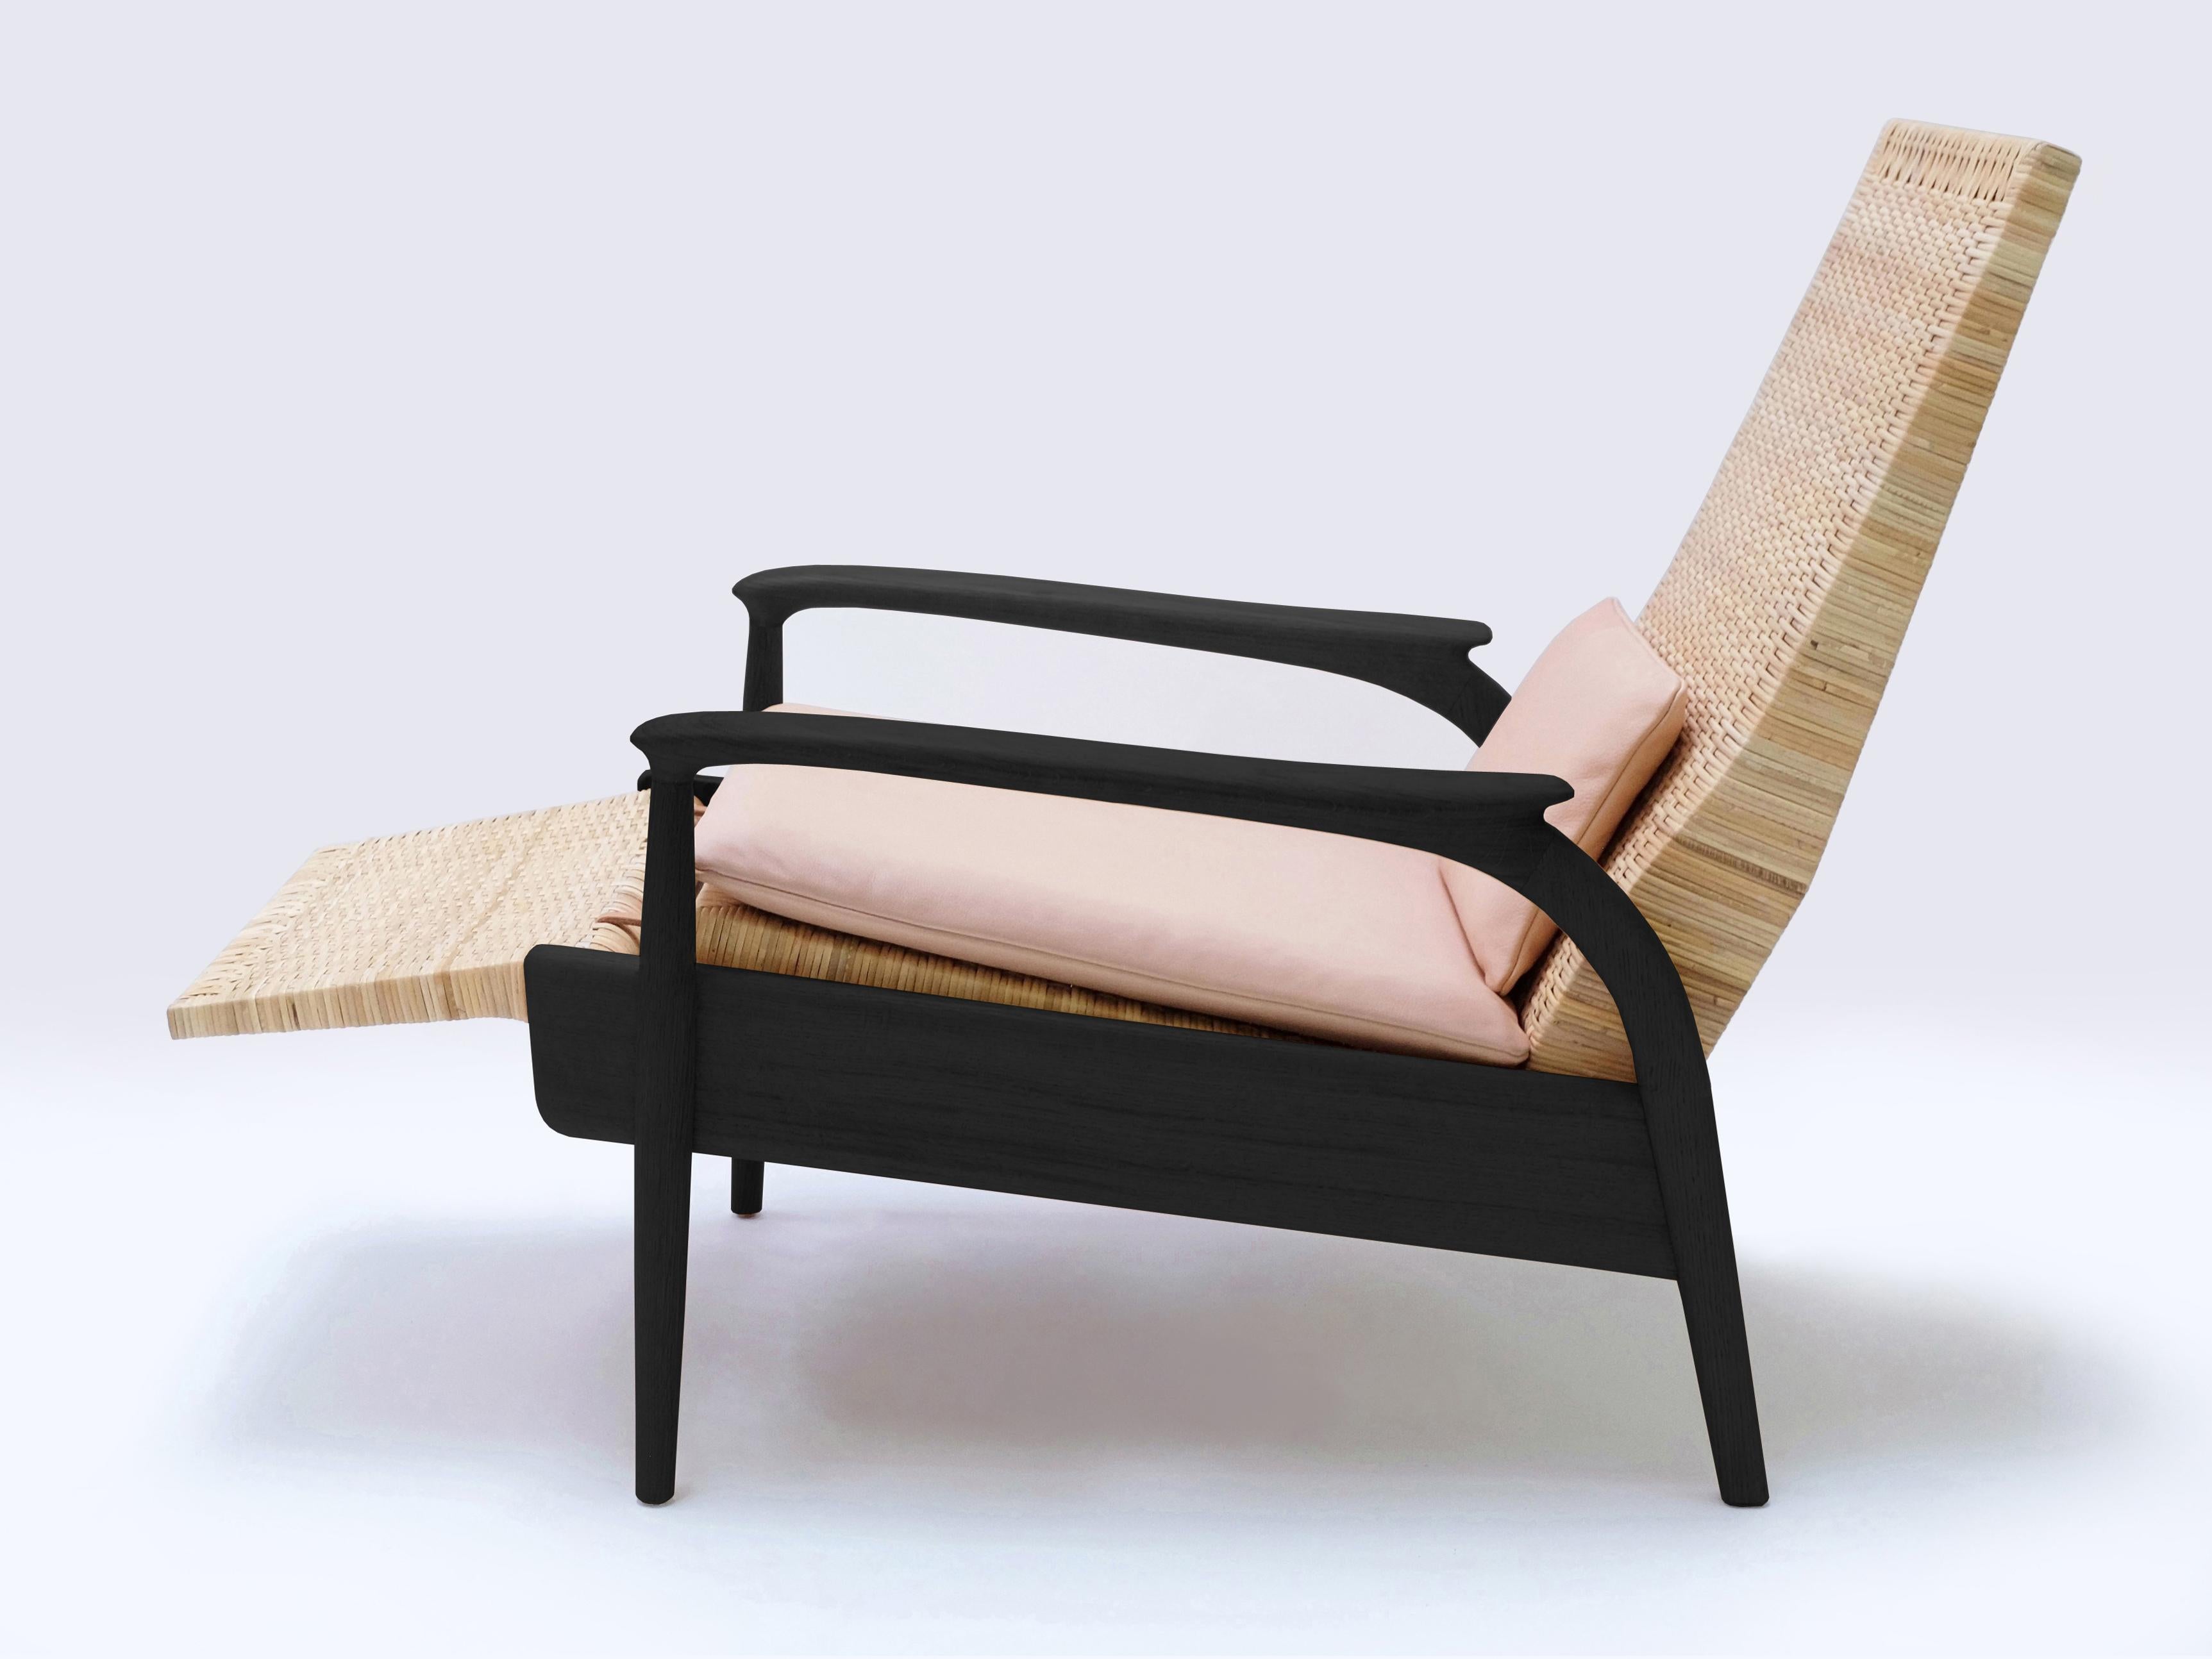 English Custom-made Lounge Chair, natural blackended Oak, Natural Cane, Leather Cushions For Sale